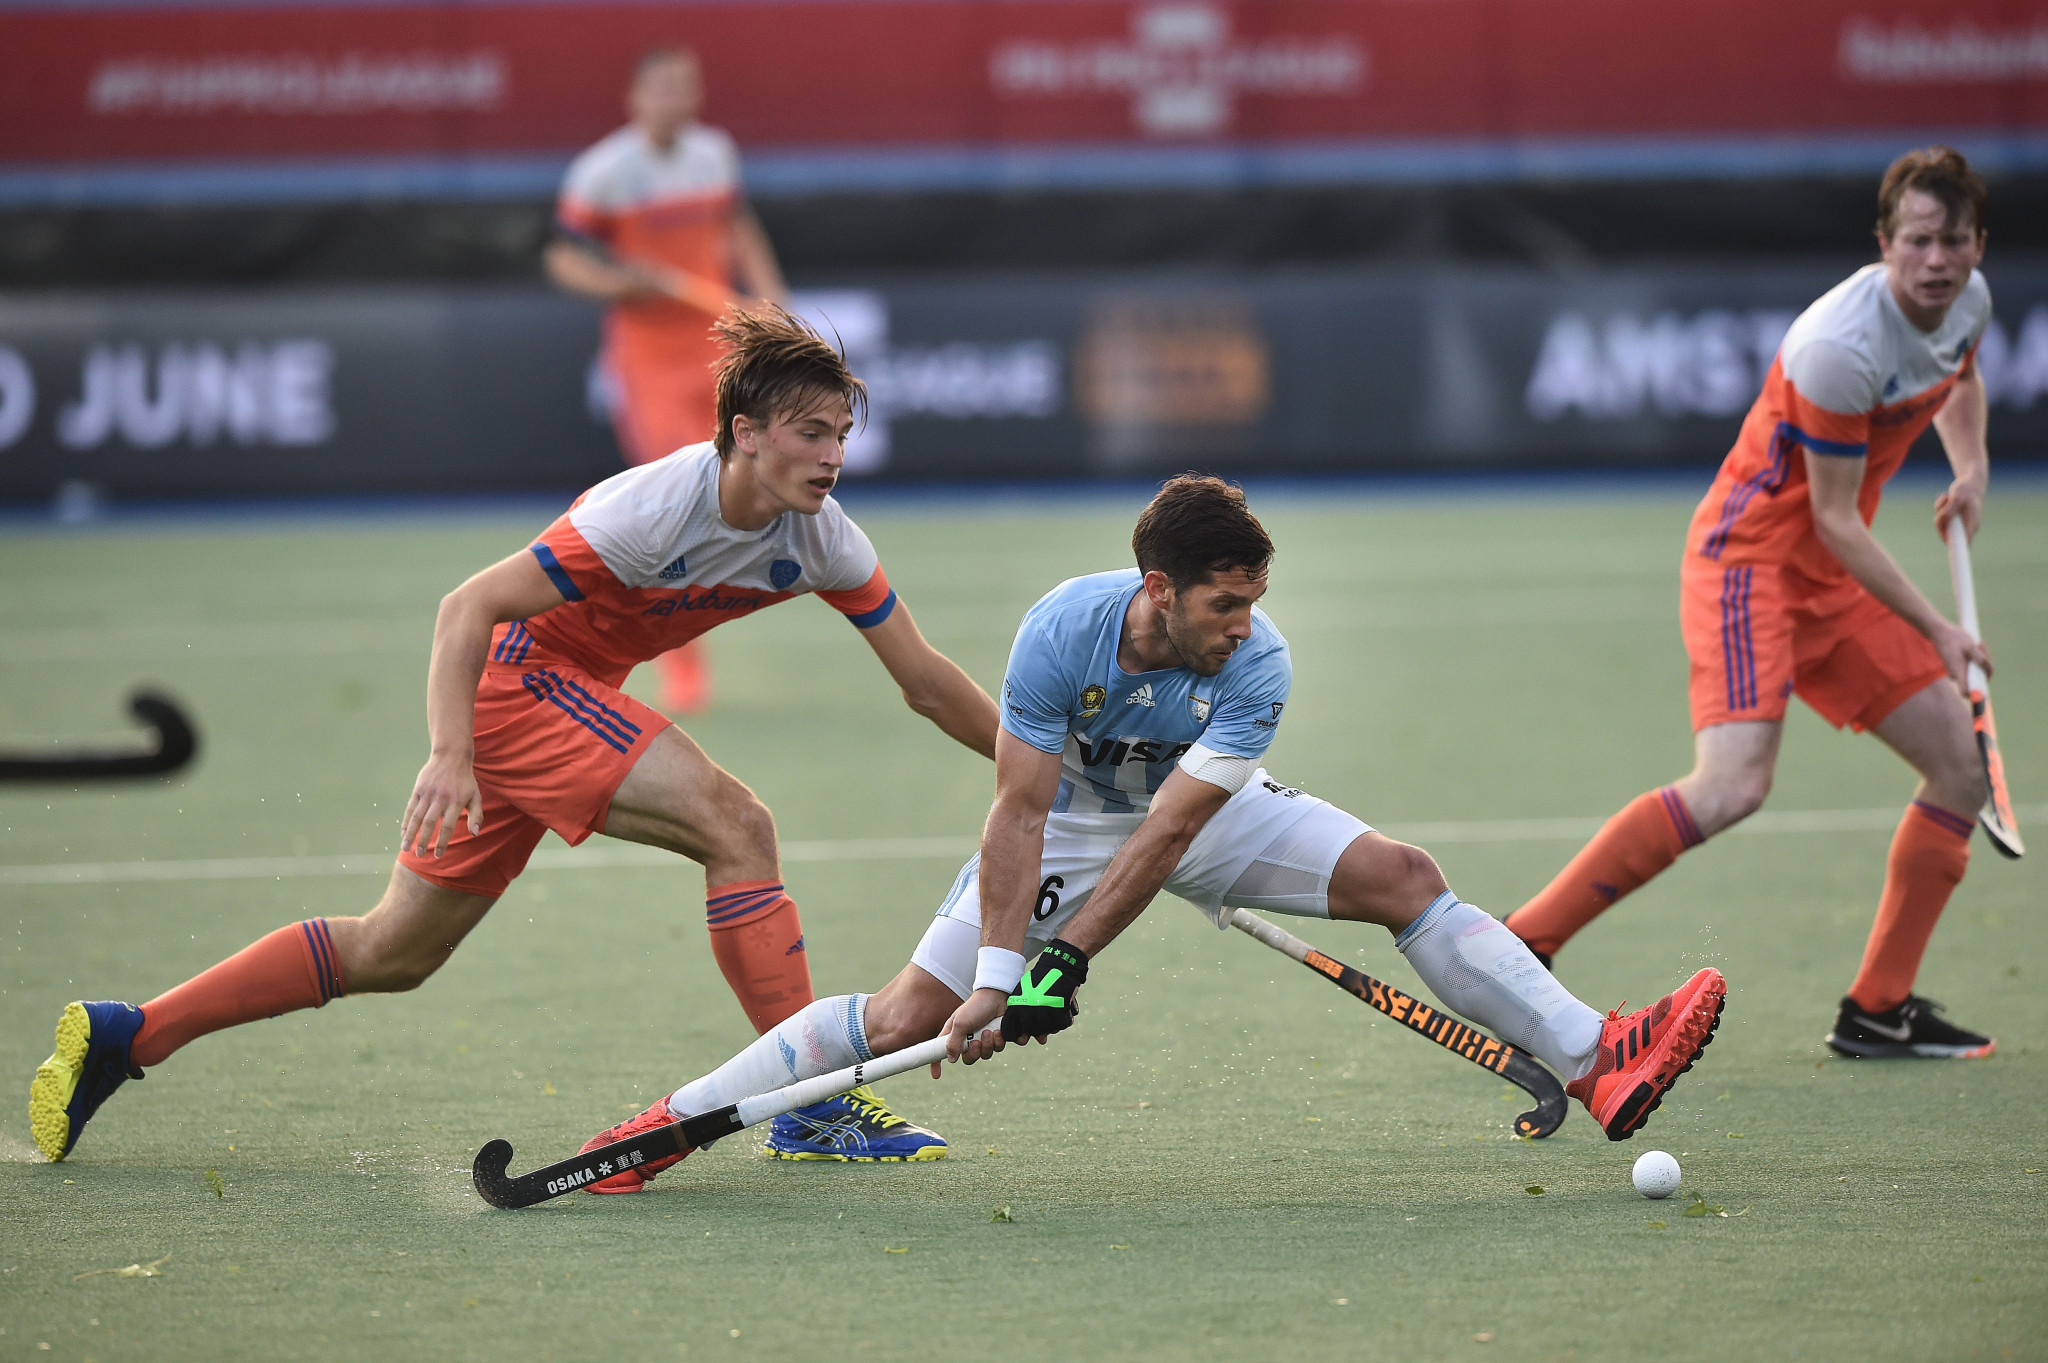 Netherlands qualify for men's FIH Pro League Grand Final despite shoot-out defeat to Argentina